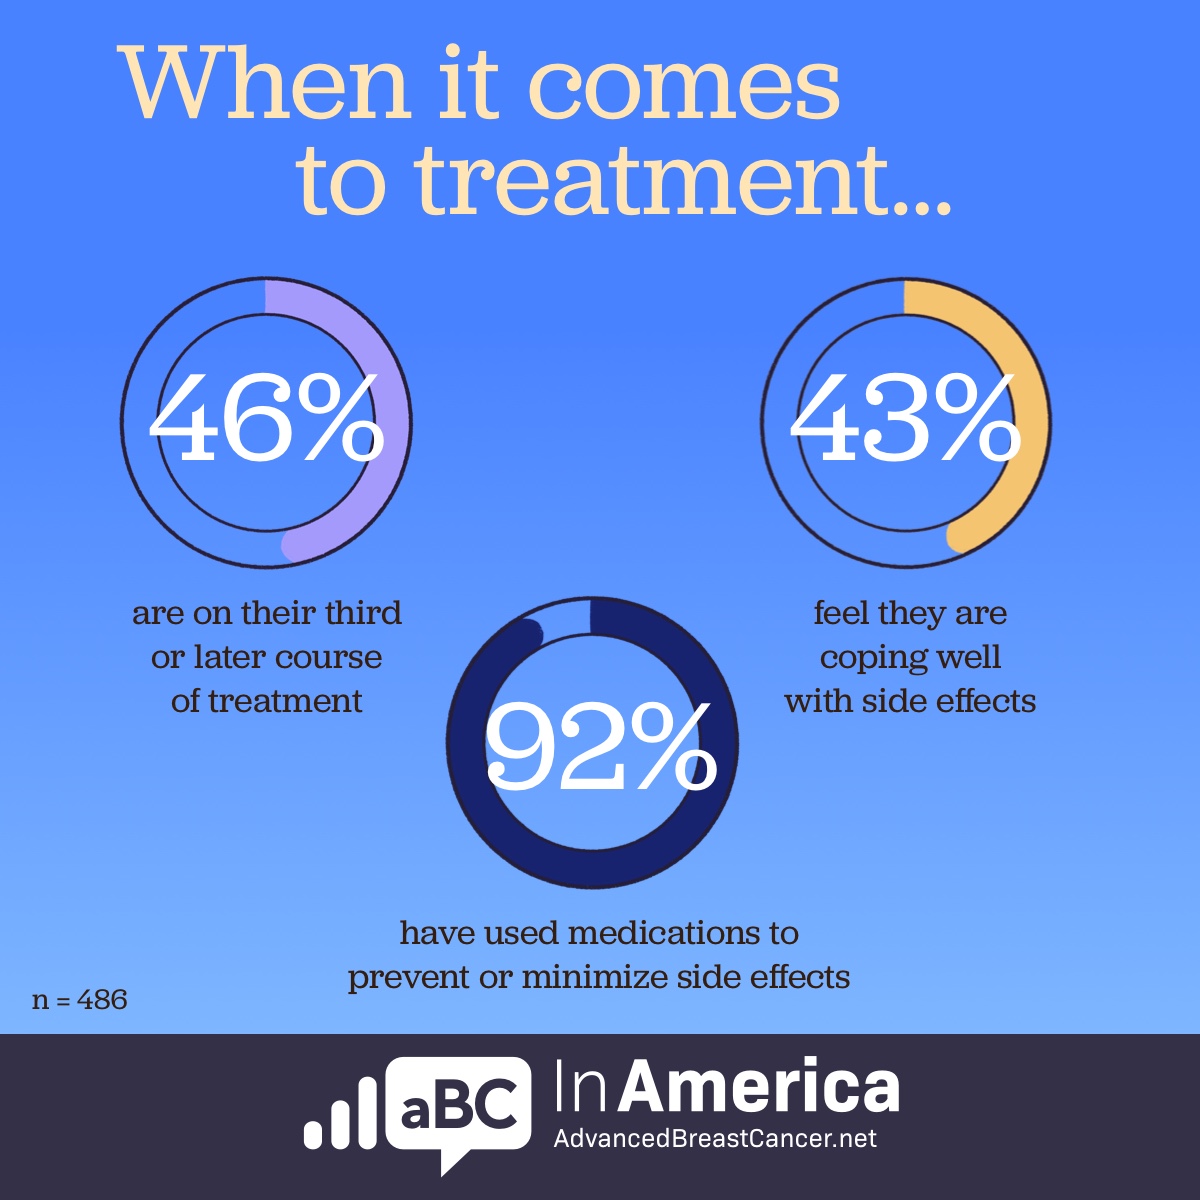 More than 40% of respondentsare on their third/later line of treatment and are coping well with side effects; 92% have used medications to prevent side effects.